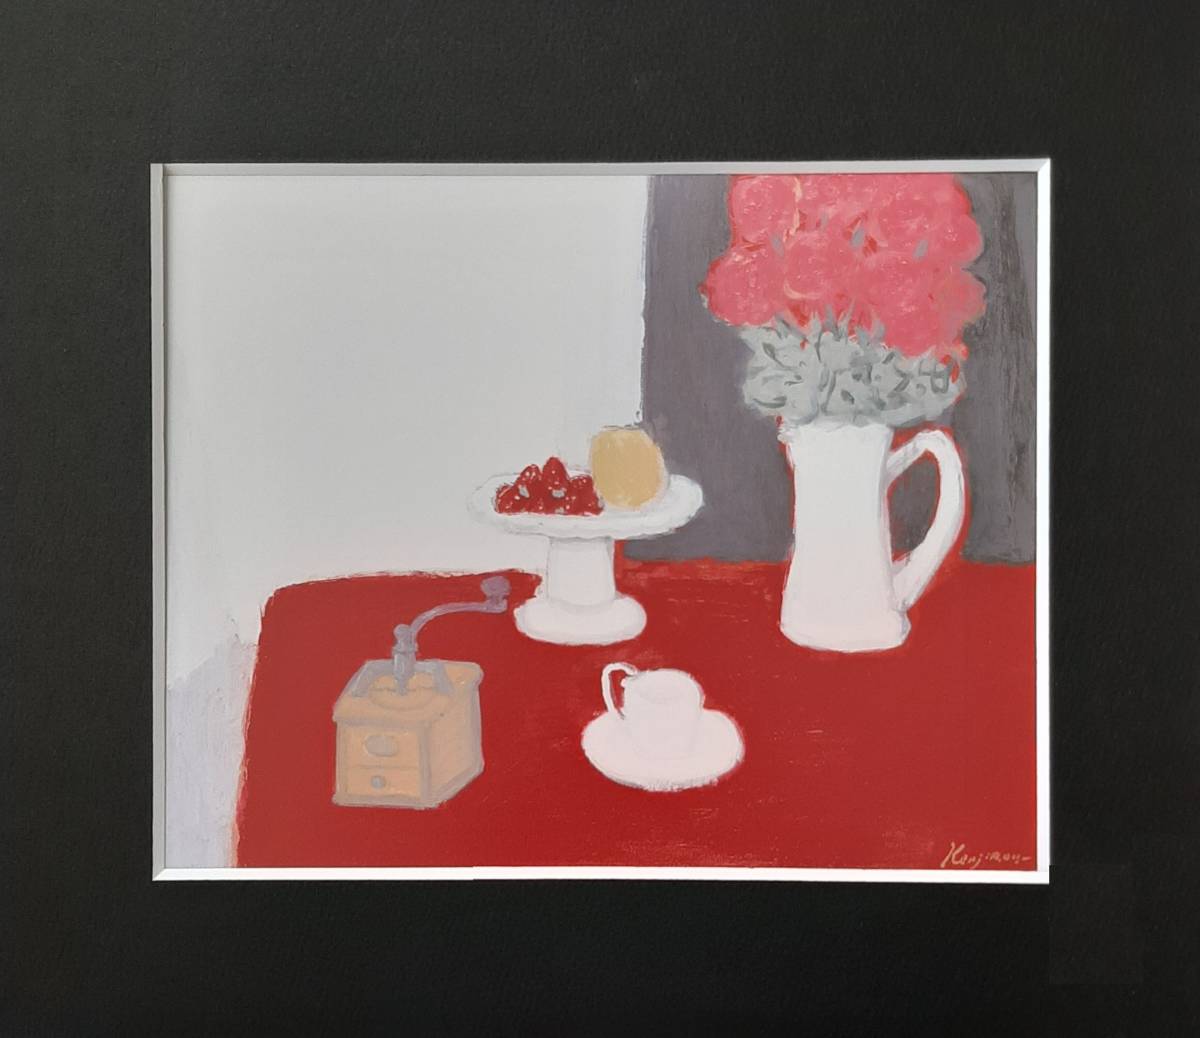  Shibata ...,[ red table. still life ], rare book of paintings in print. frame ., four season, scenery, popular work, order mat attaching * made in Japan new goods amount entering, free shipping 